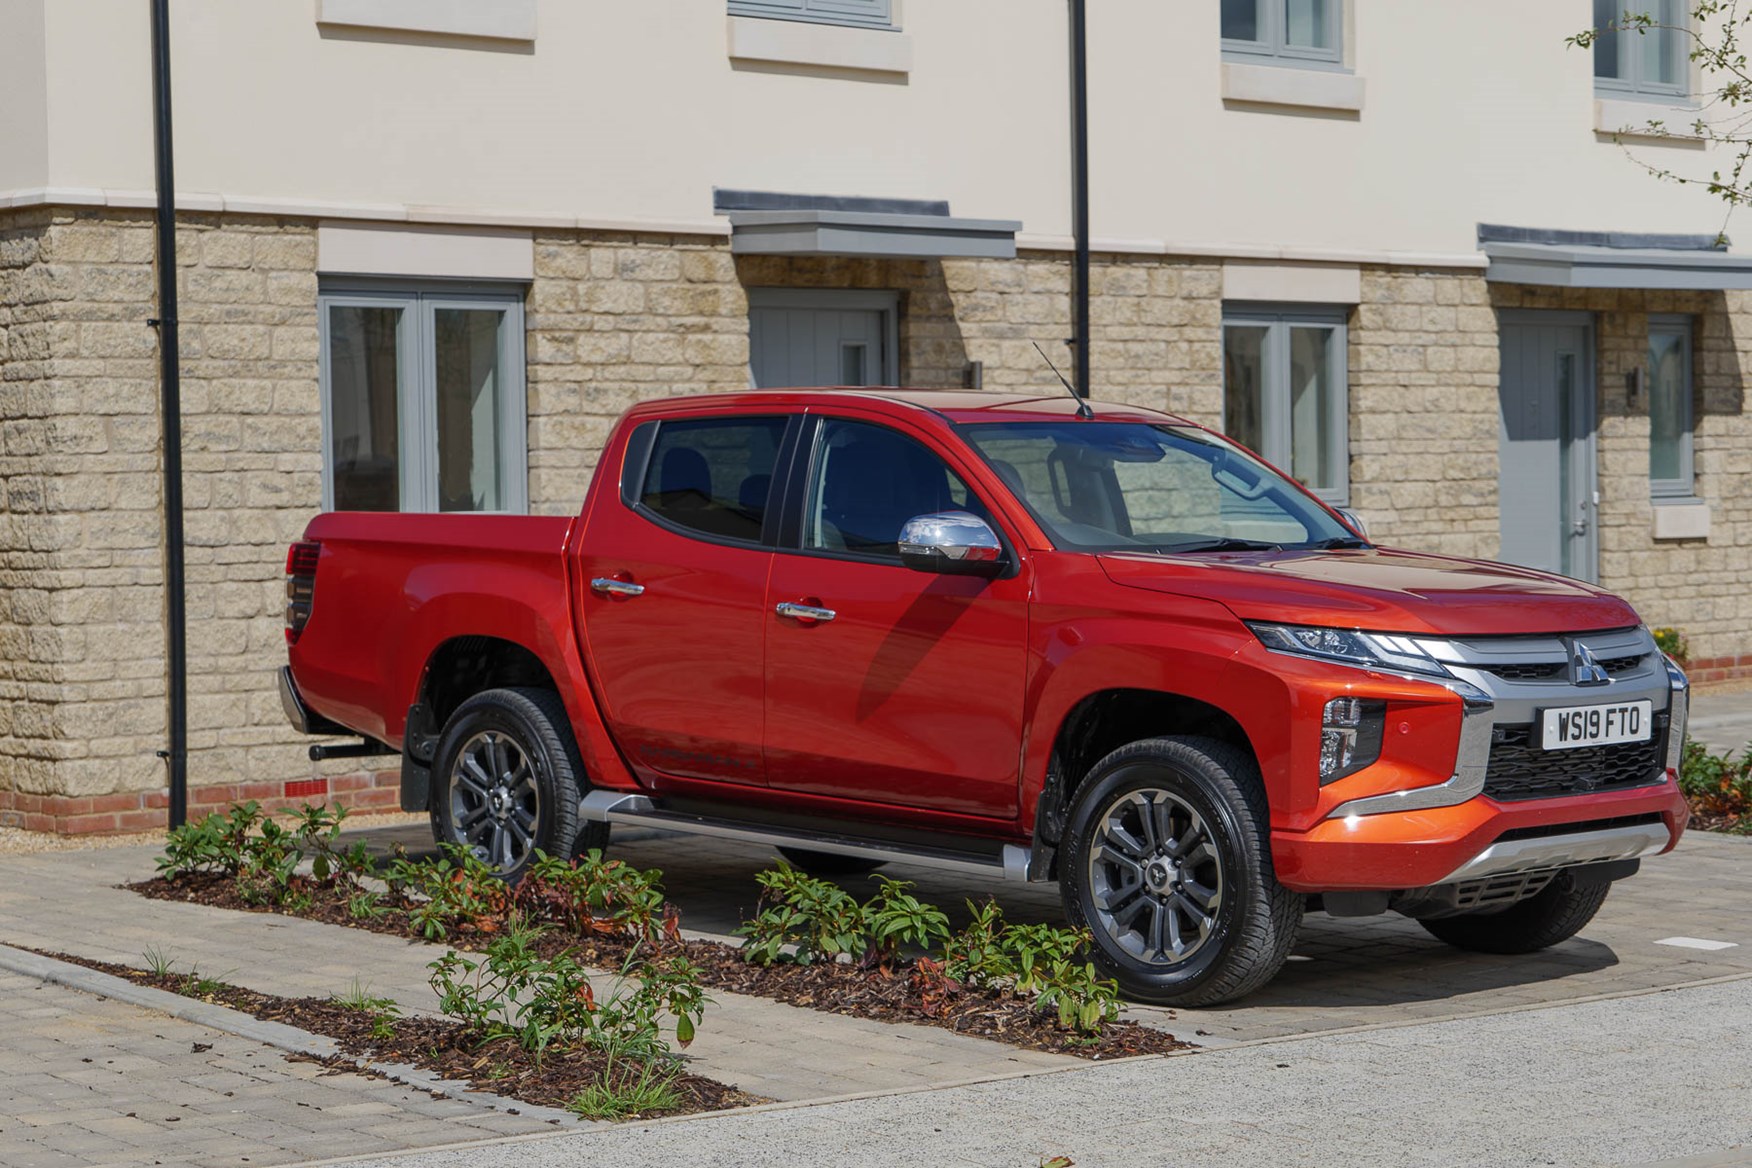 The 2019 Mitsubishi L200 Barbarian X fits on urban driveways comfortably, thanks to the narrow dimensions